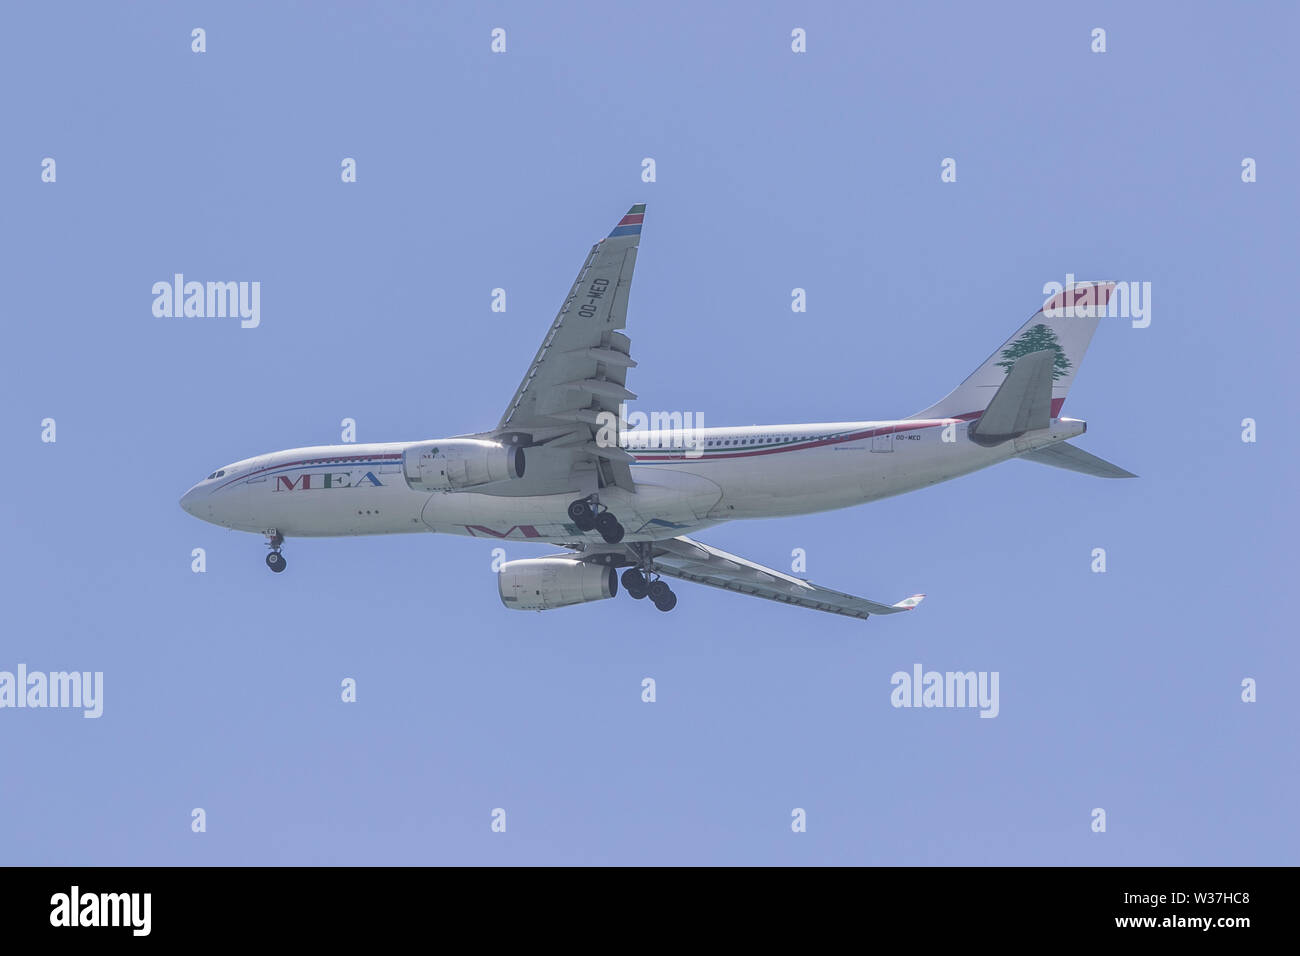 July 13, 2019 - Beirut, Lebanon - The Lebanese flight carrier Middle East Airlines landing at Beirut. (Credit Image: © Amer Ghazzal/SOPA Images via ZUMA Wire) Stock Photo